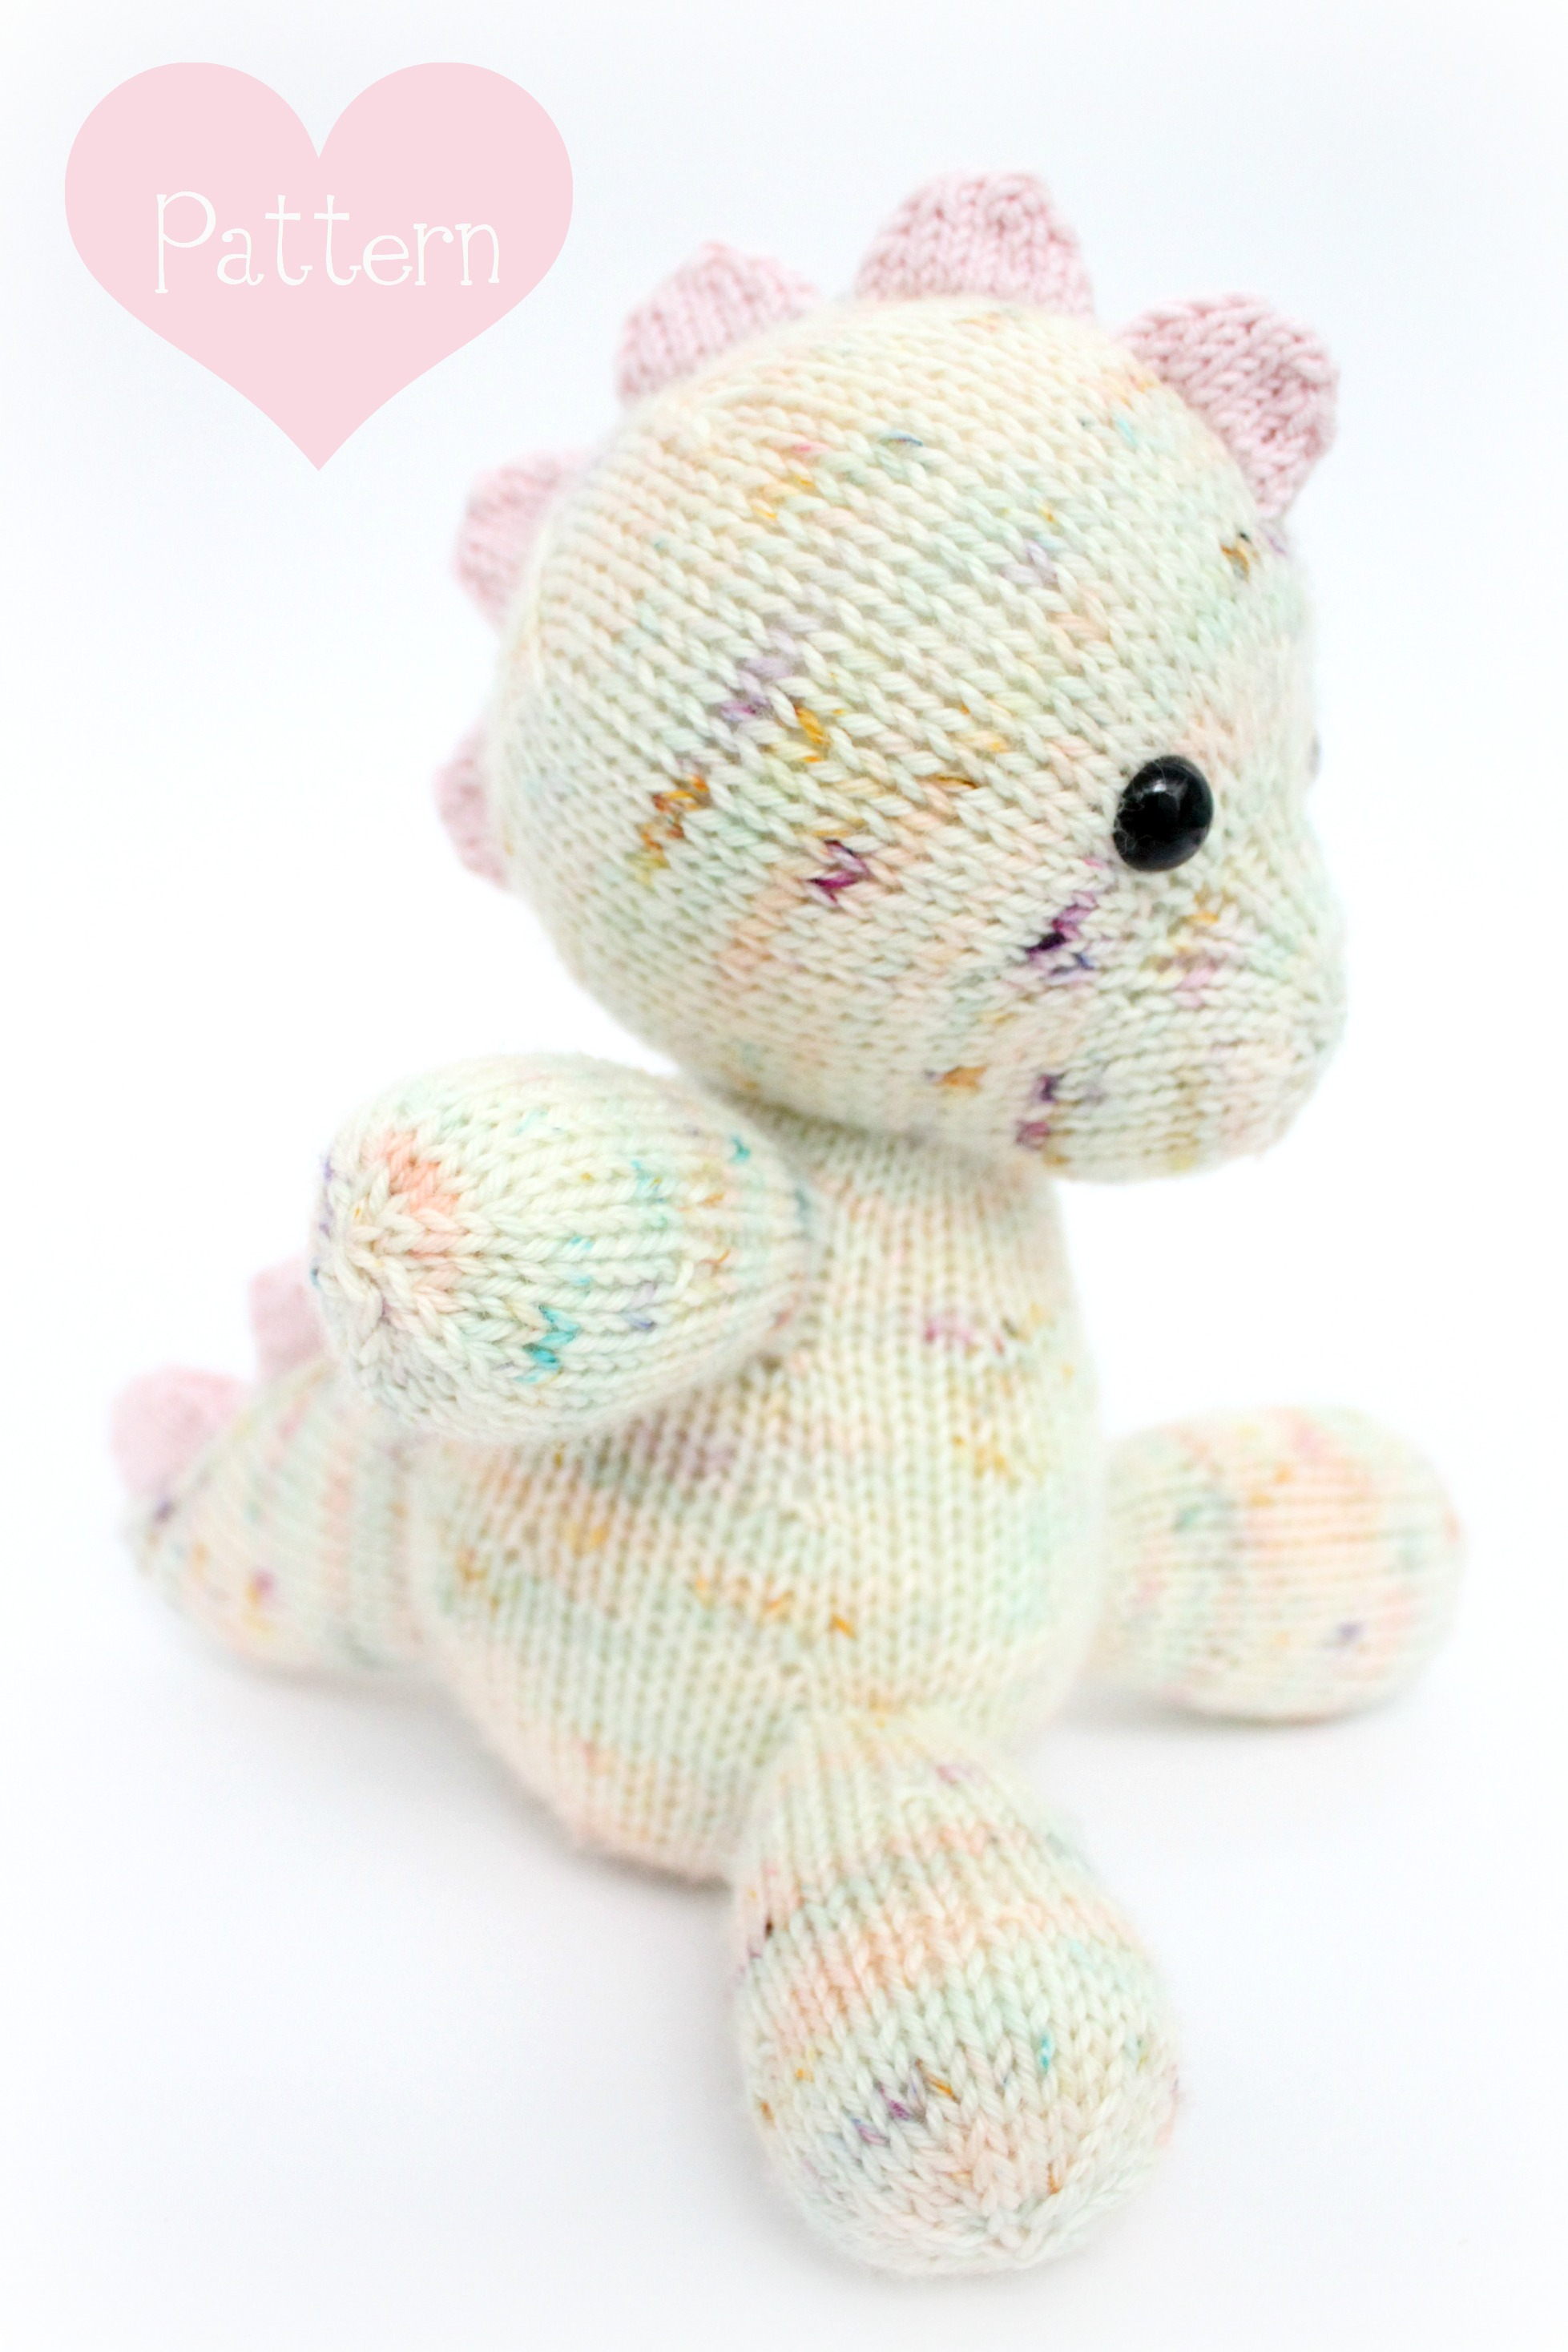 Knitting Patterns For Baby Toys Free Knitting Pattern Daisy The Ba Dino Pdf Knitting Pattern